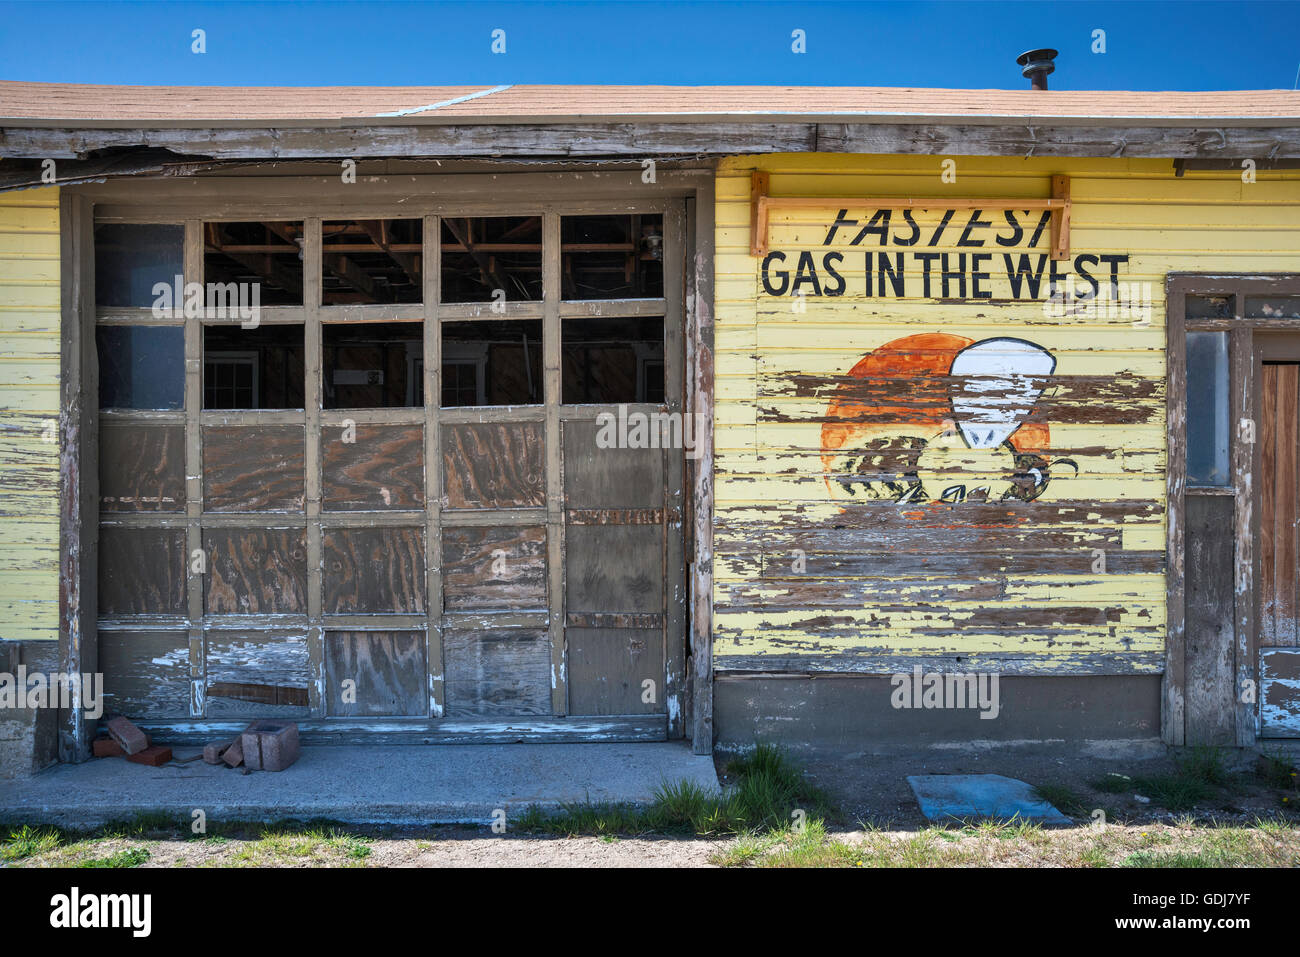 Old mural at abandoned gas station in historic silver mining town of Pioche, Great Basin, Nevada, USA Stock Photo